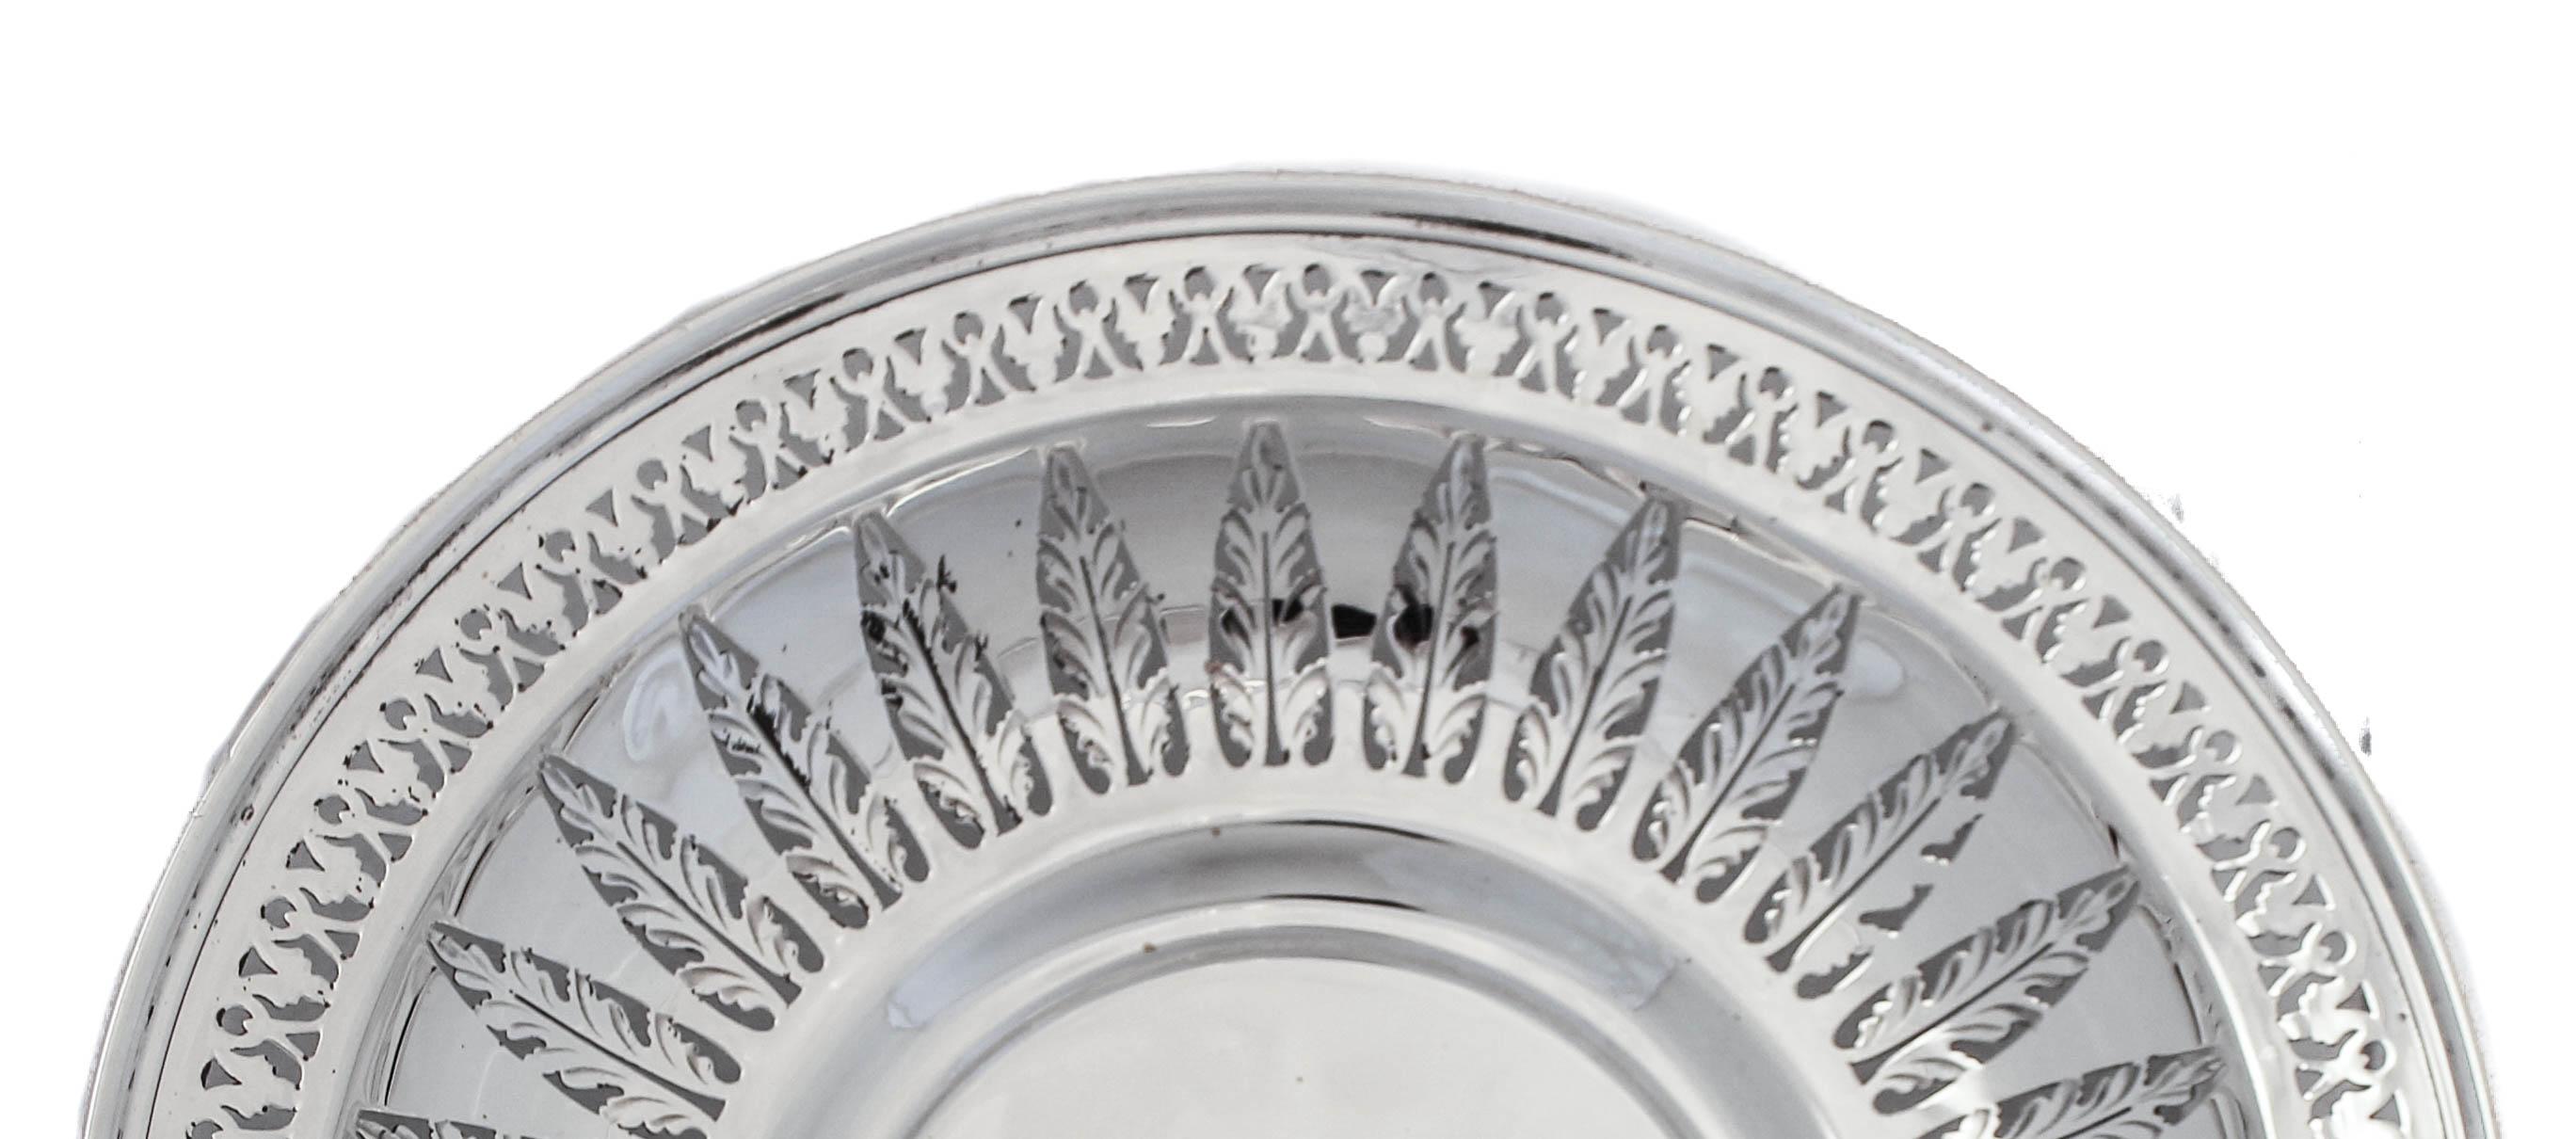 We are offering this sterling silver Art Deco bowl by Dominick & Haff from the 1920’s. It has a classic Art Deco design; the palm leaves and the geometric pattern going around the rim. Palm leaf patterns were especially popular in the 1920’s and